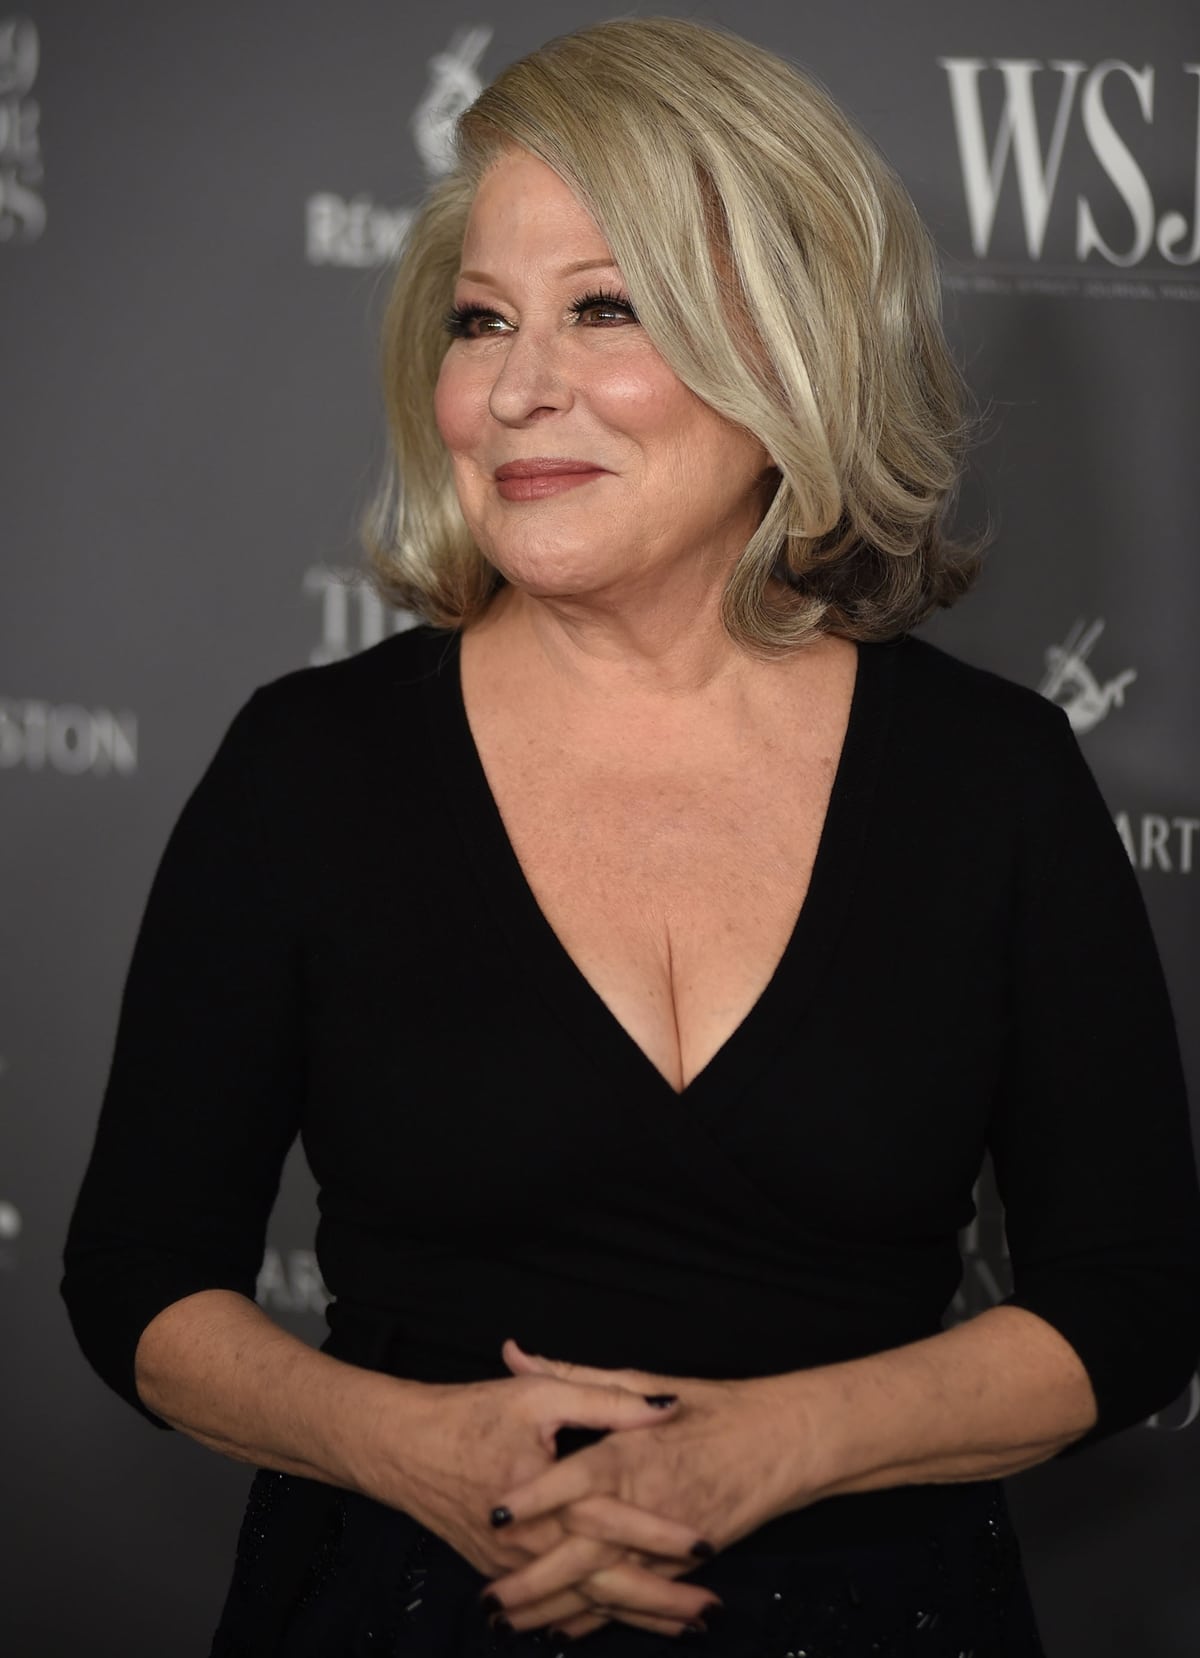 Bette Midler has mocked Kim Kardashian's marriage track record and nude photos